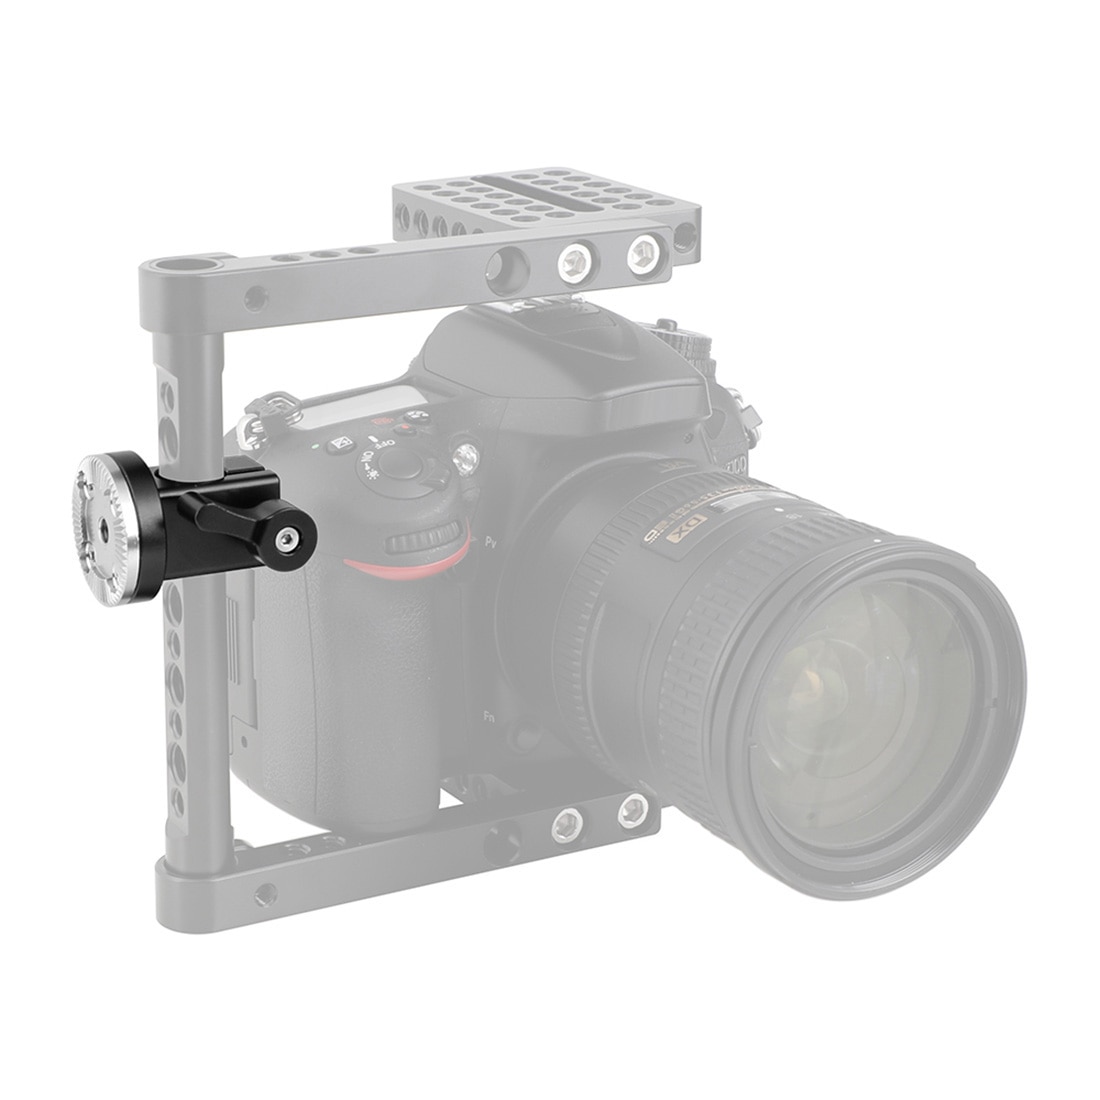 BGNing 15mm Single Rail Rod Clamp With M6 ARRI Style Rosette Mount For DSLR Camera Cage Rig System Handgrip Accessories